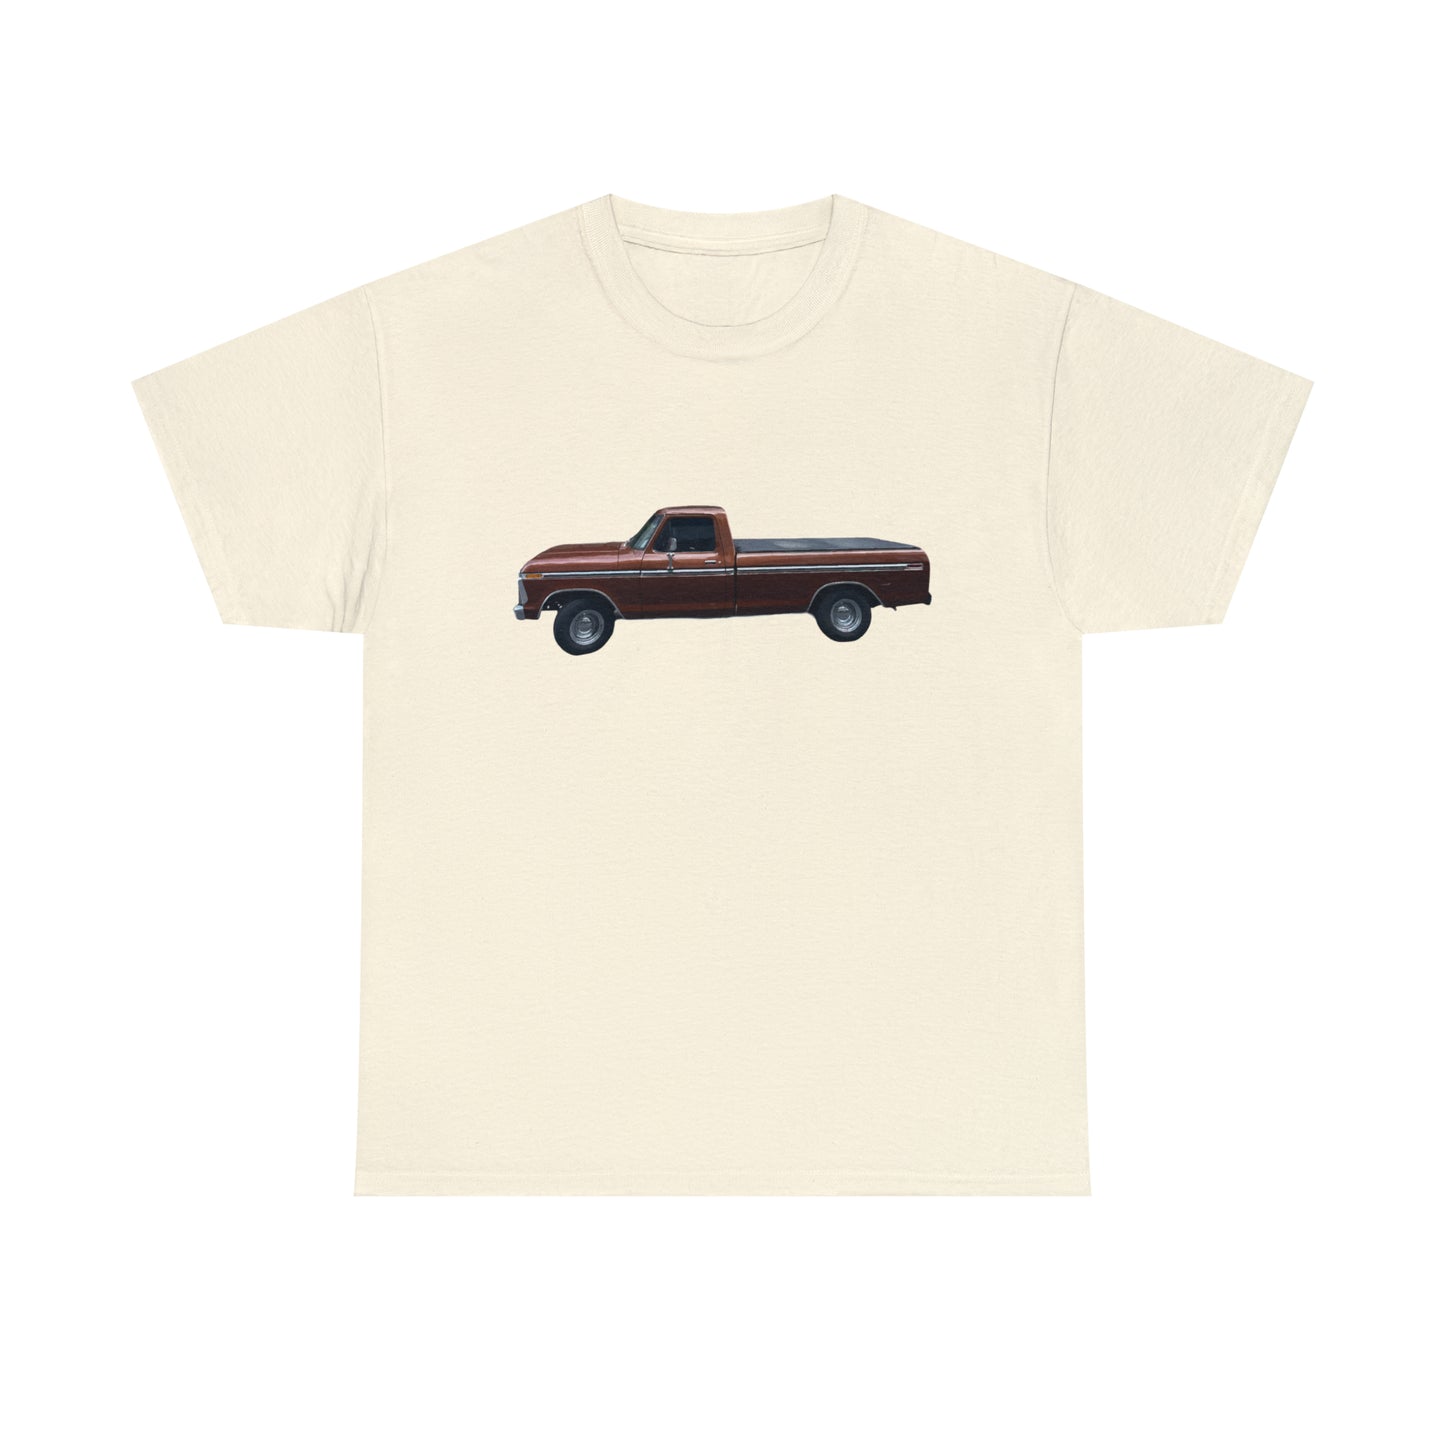 Antique Ford Truck T-Shirt